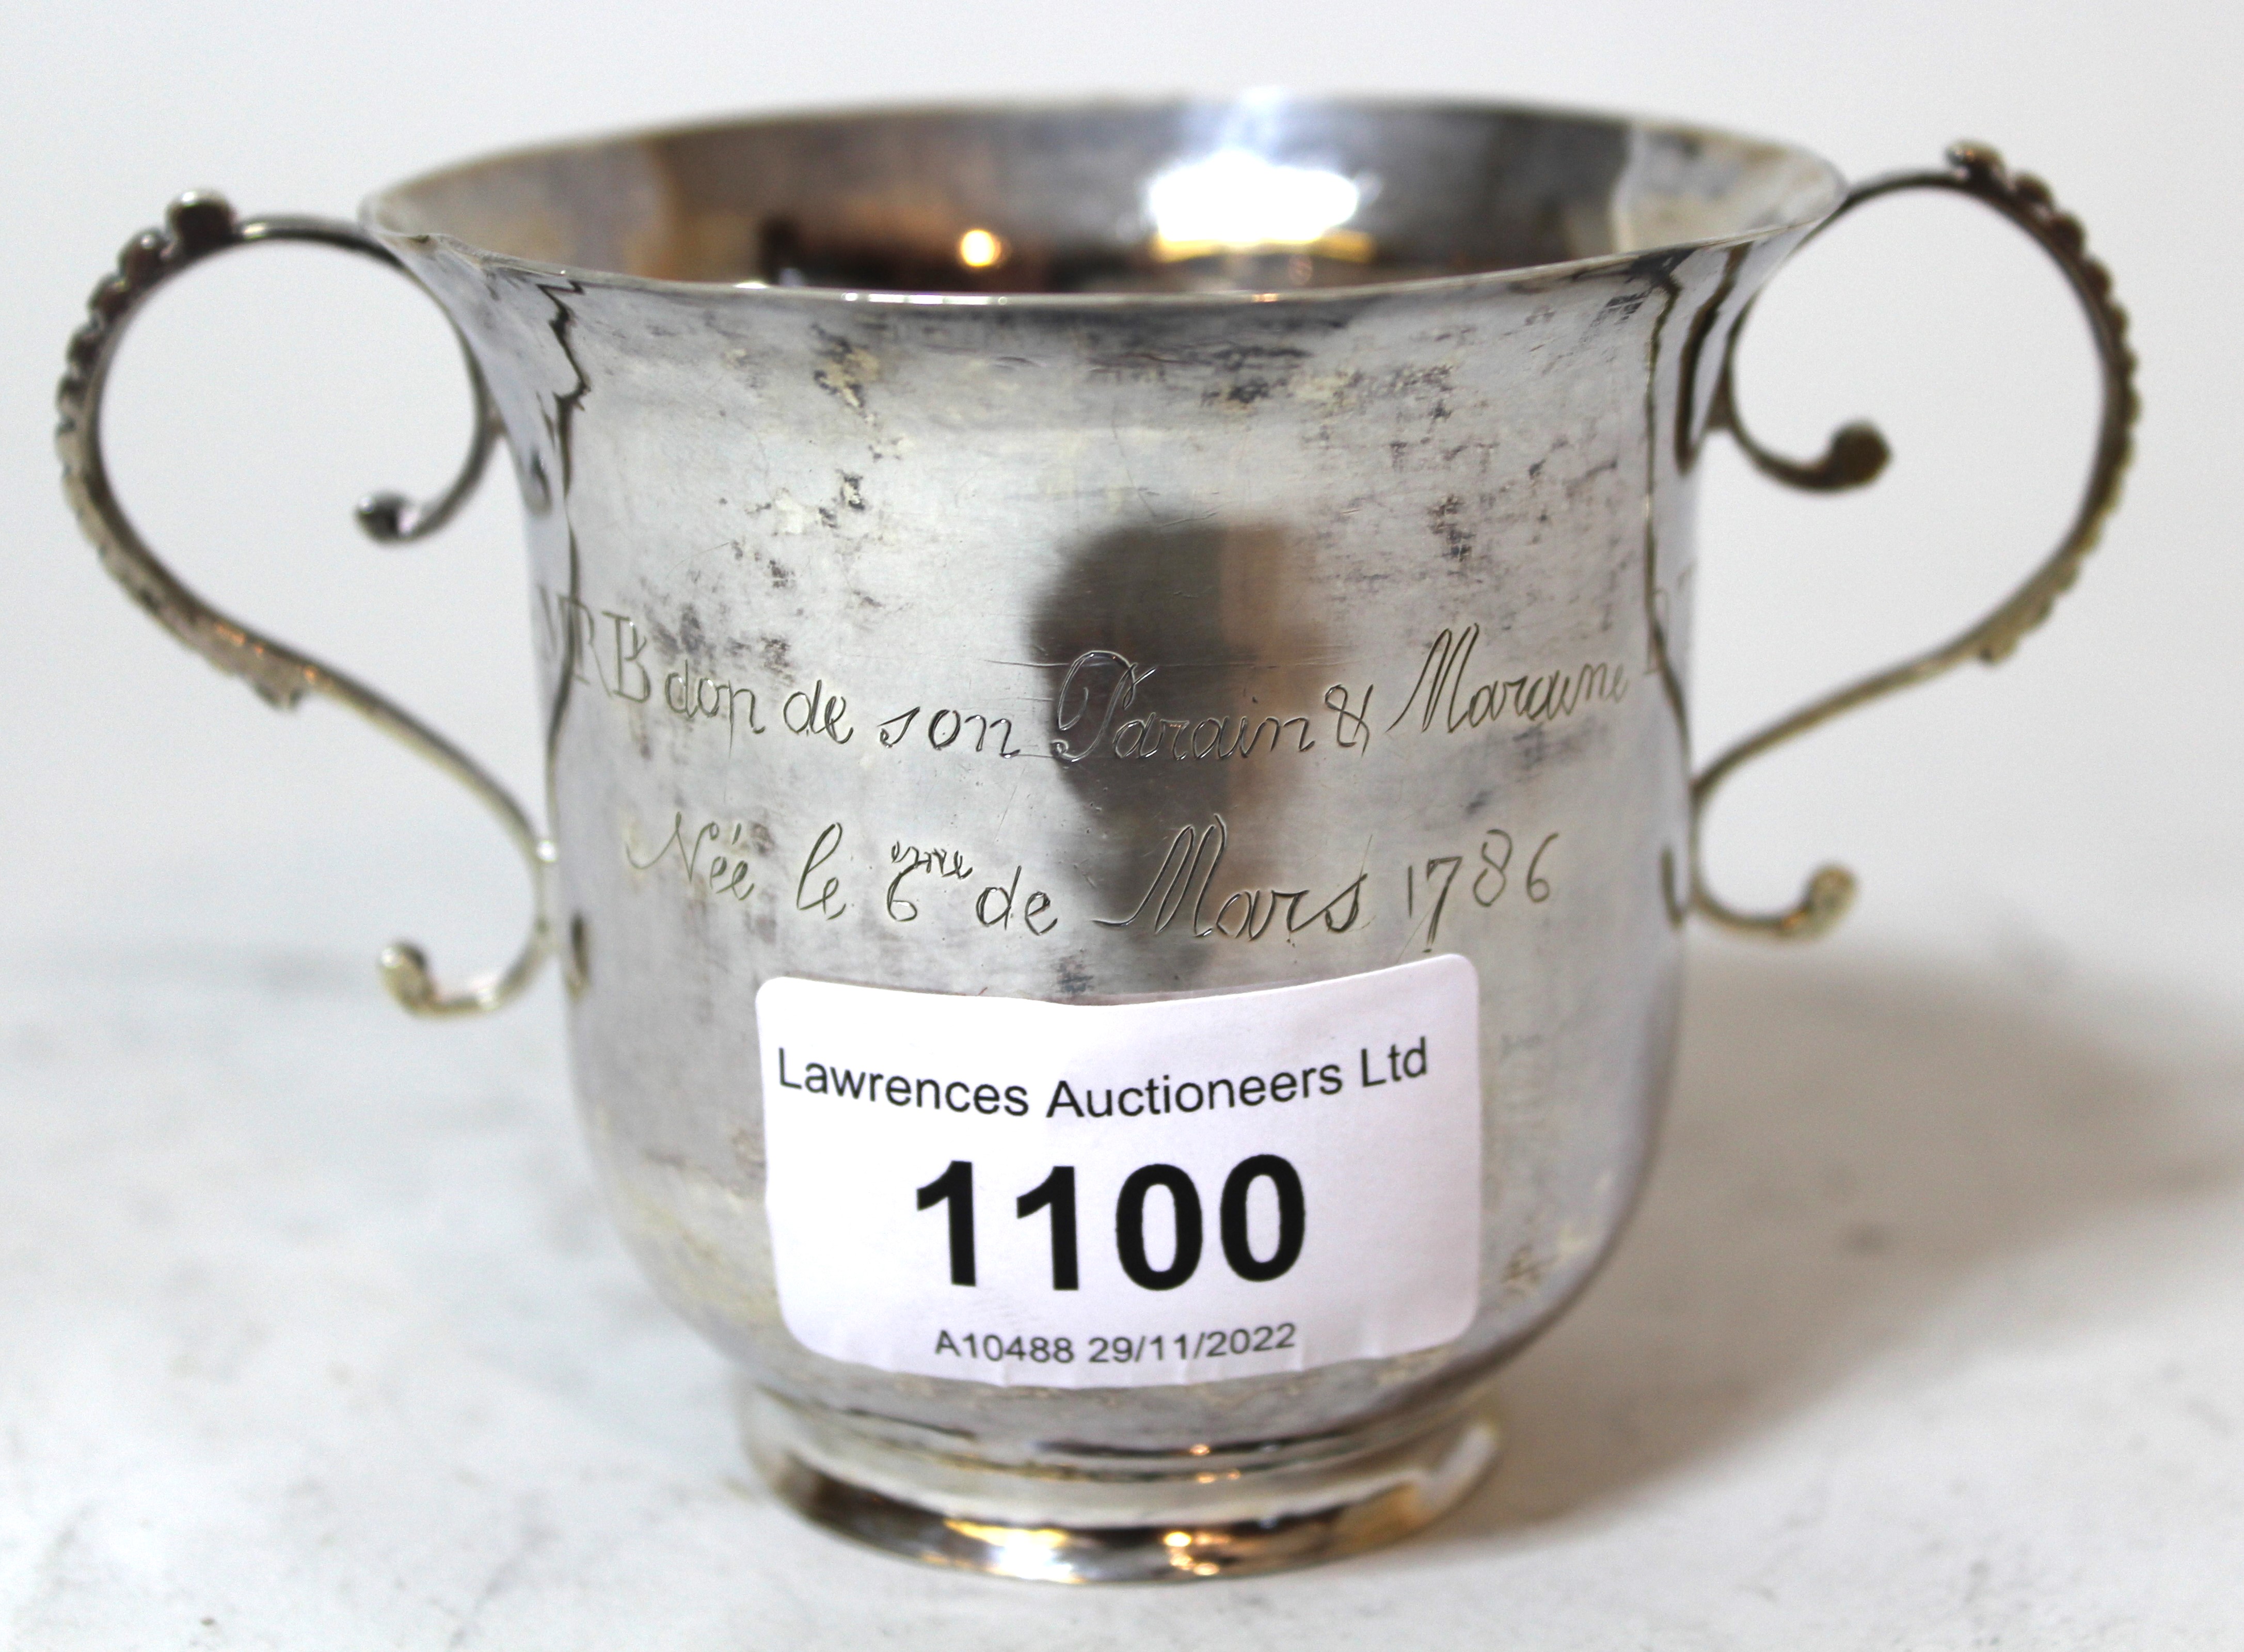 Small 18th Century silver two handled porringer, possibly Scottish, with a French inscription,